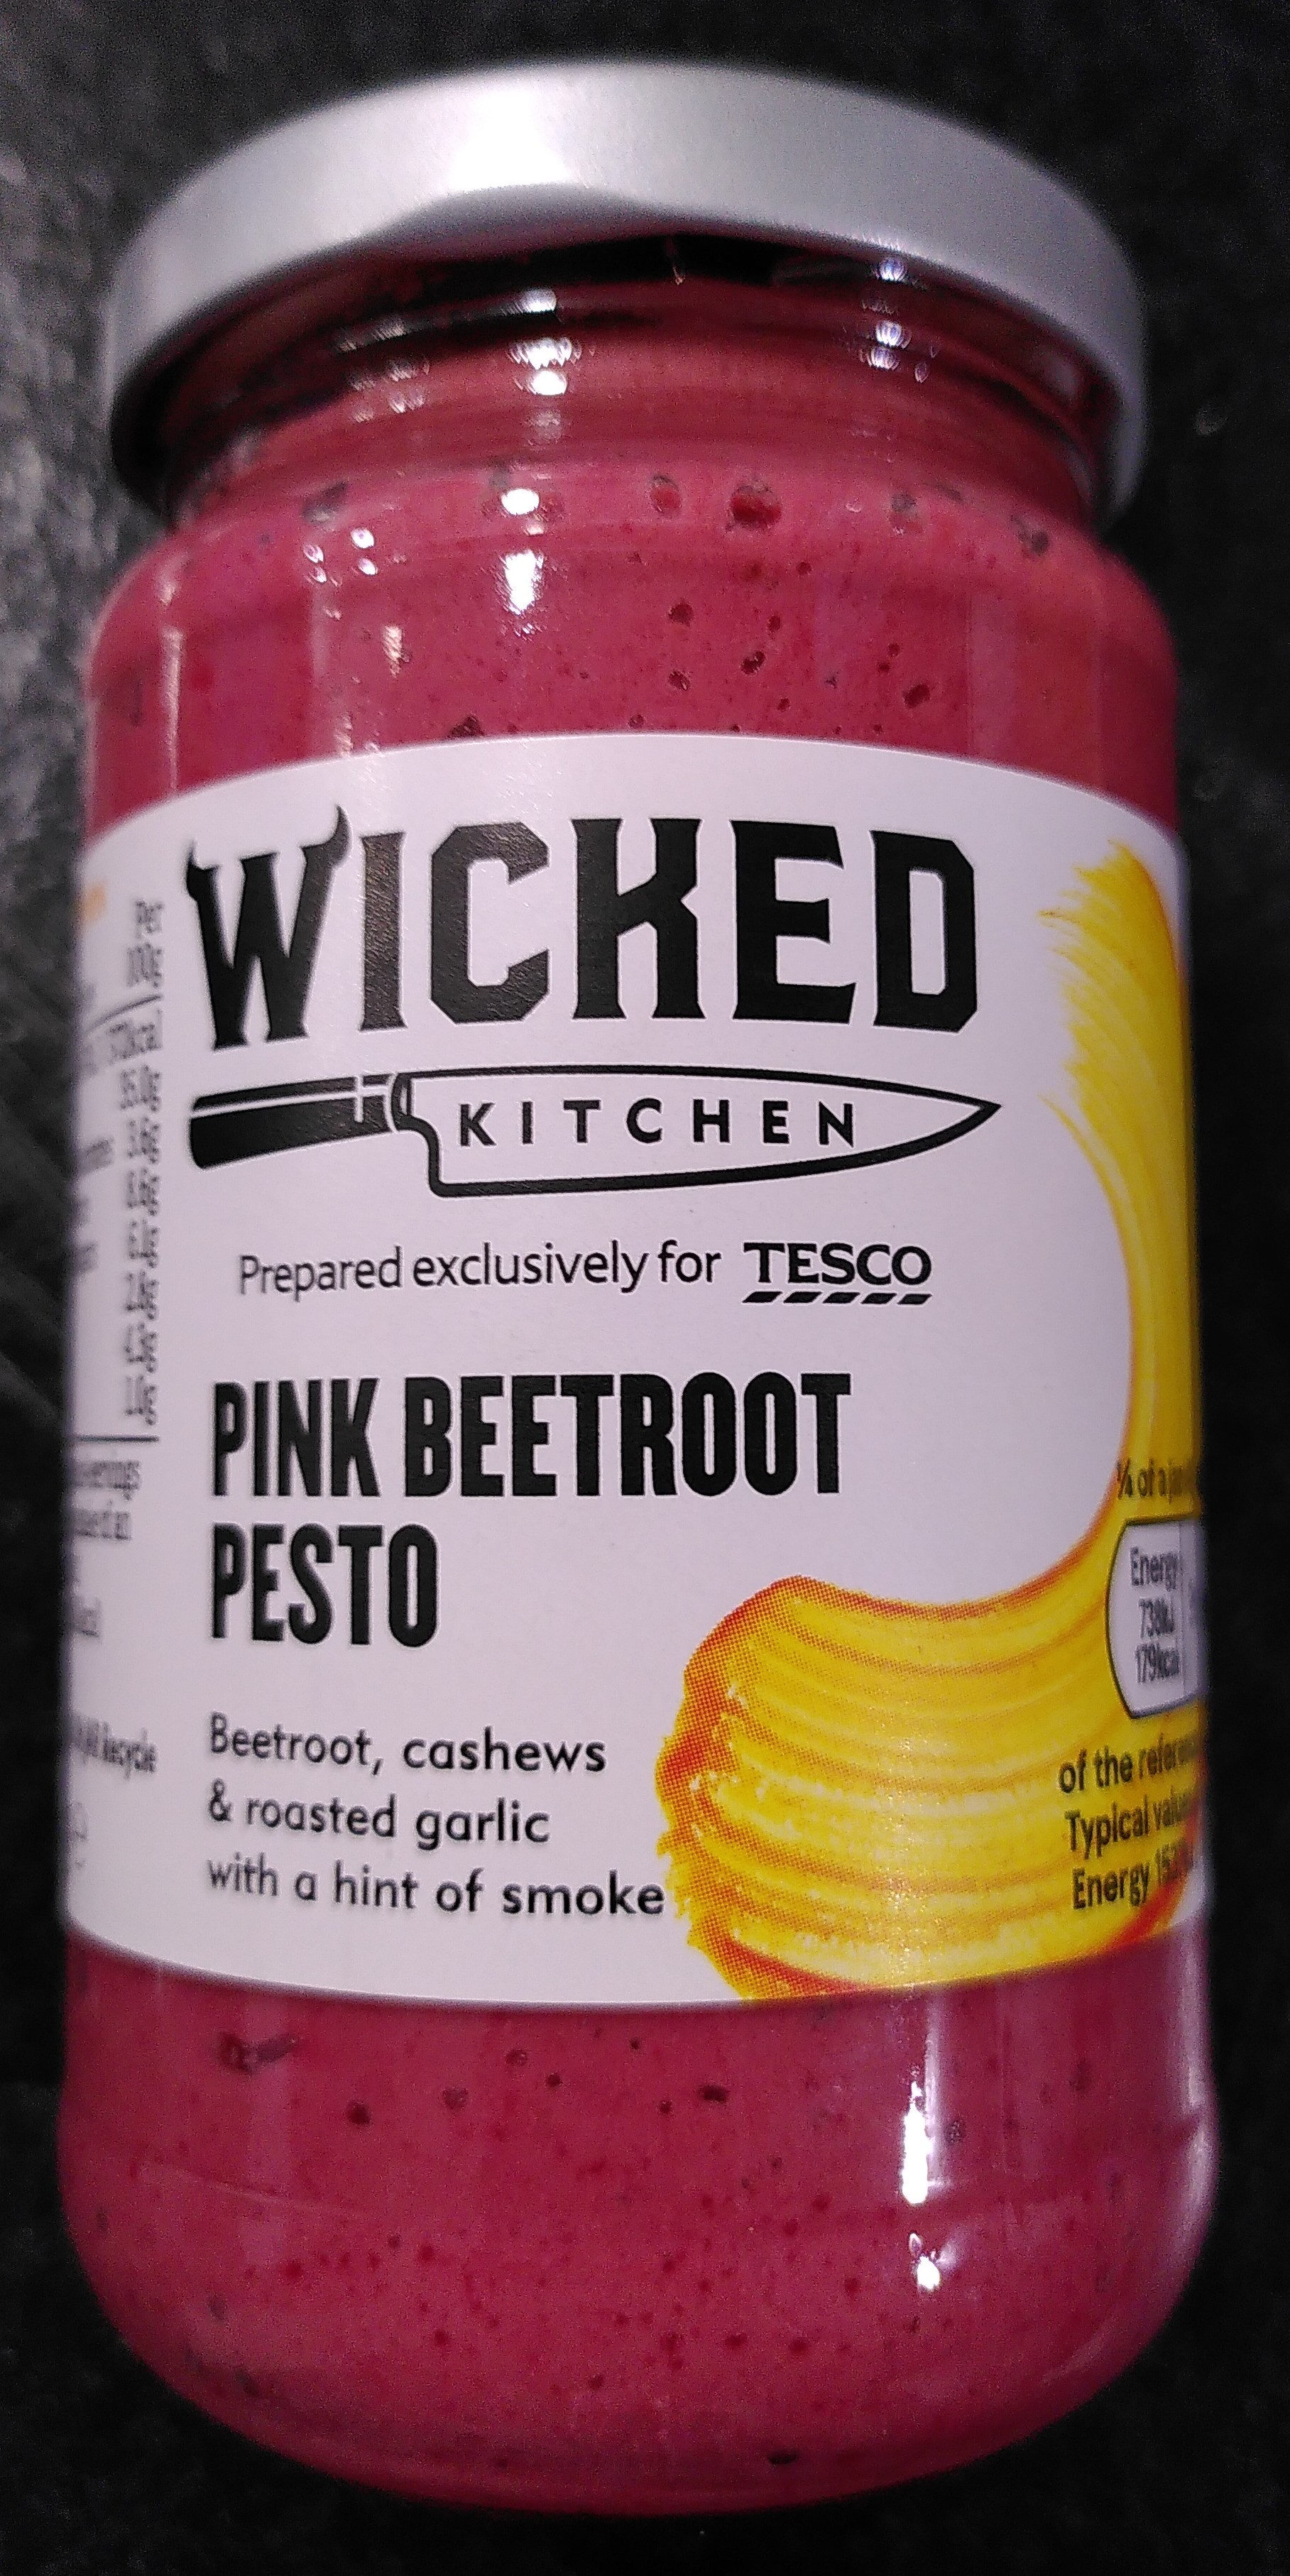 Wicked Kitchen Pink Beetroot Pesto - Product